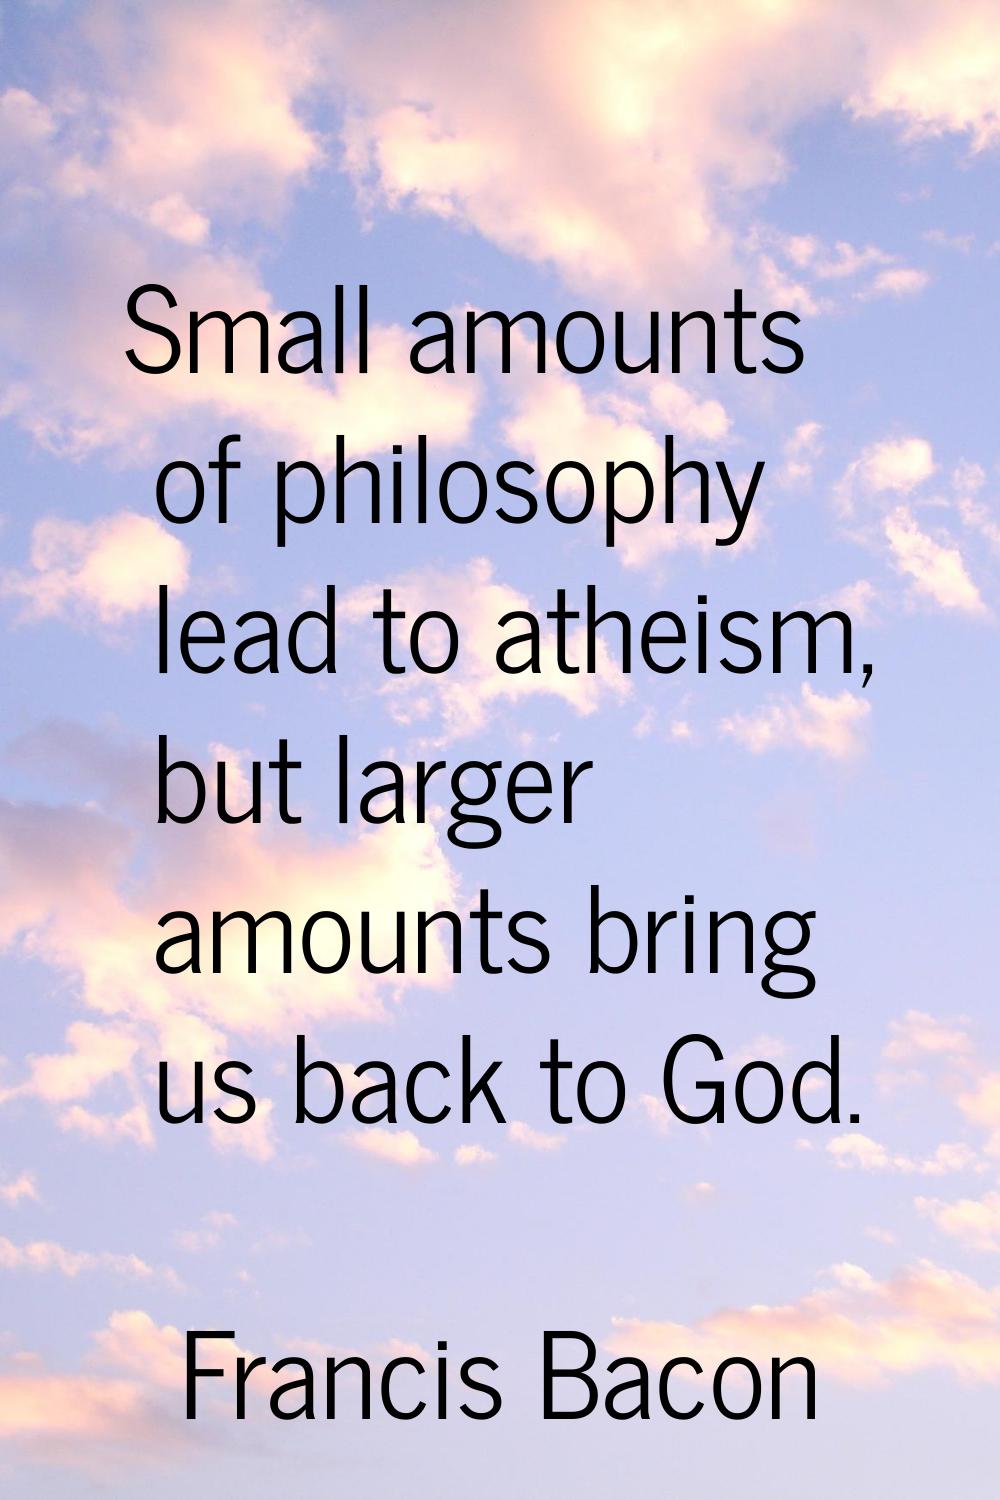 Small amounts of philosophy lead to atheism, but larger amounts bring us back to God.